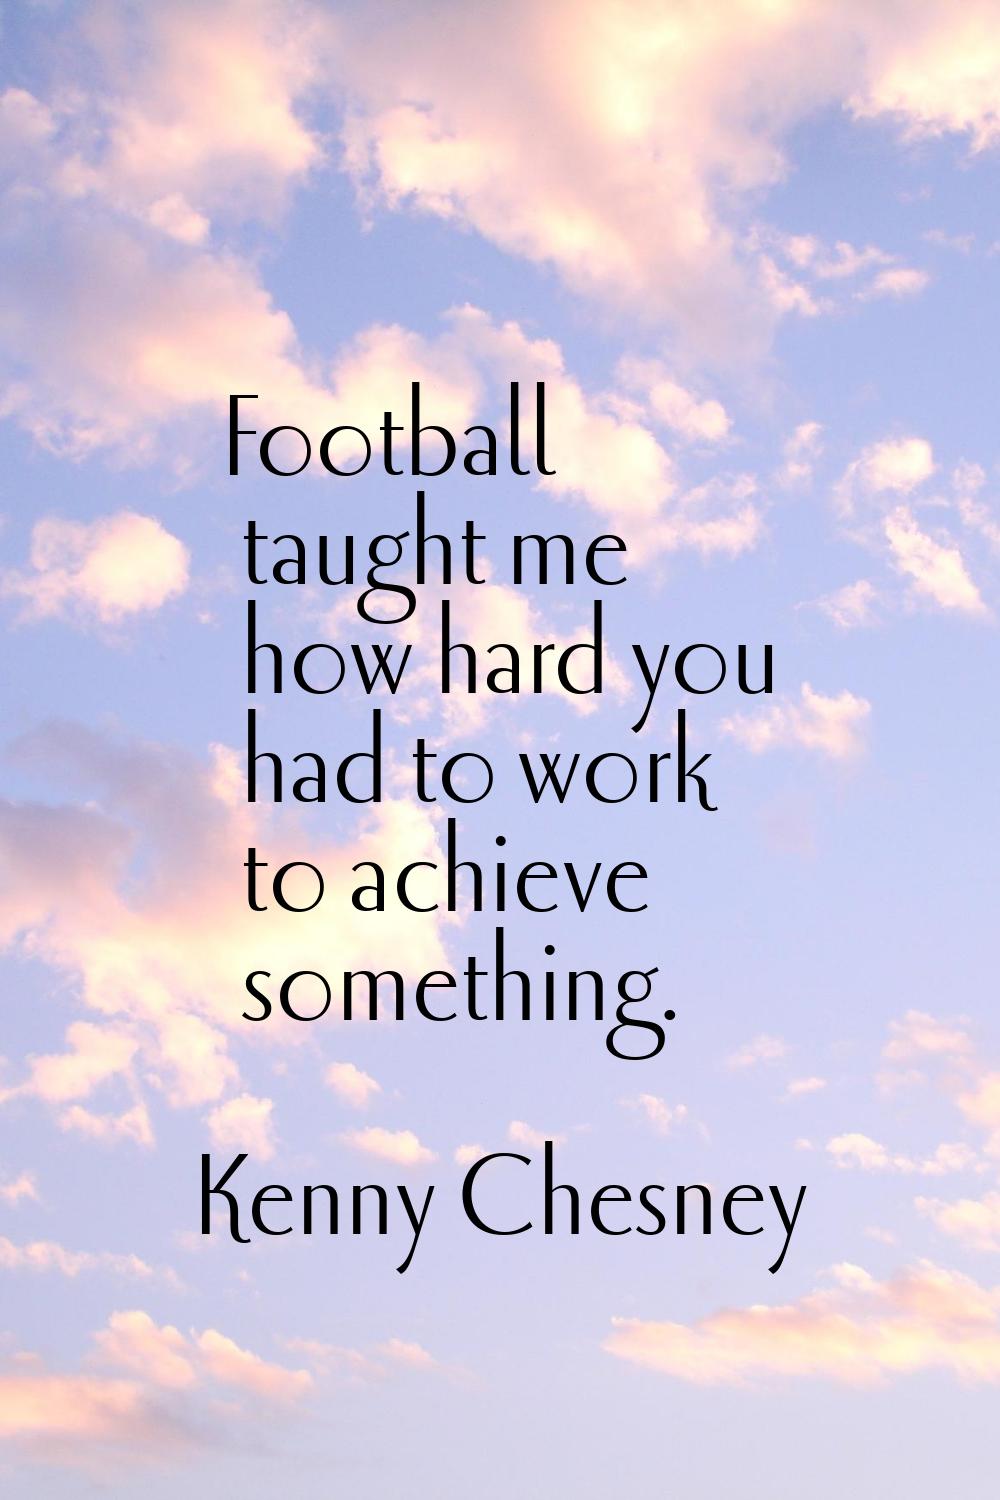 Football taught me how hard you had to work to achieve something.